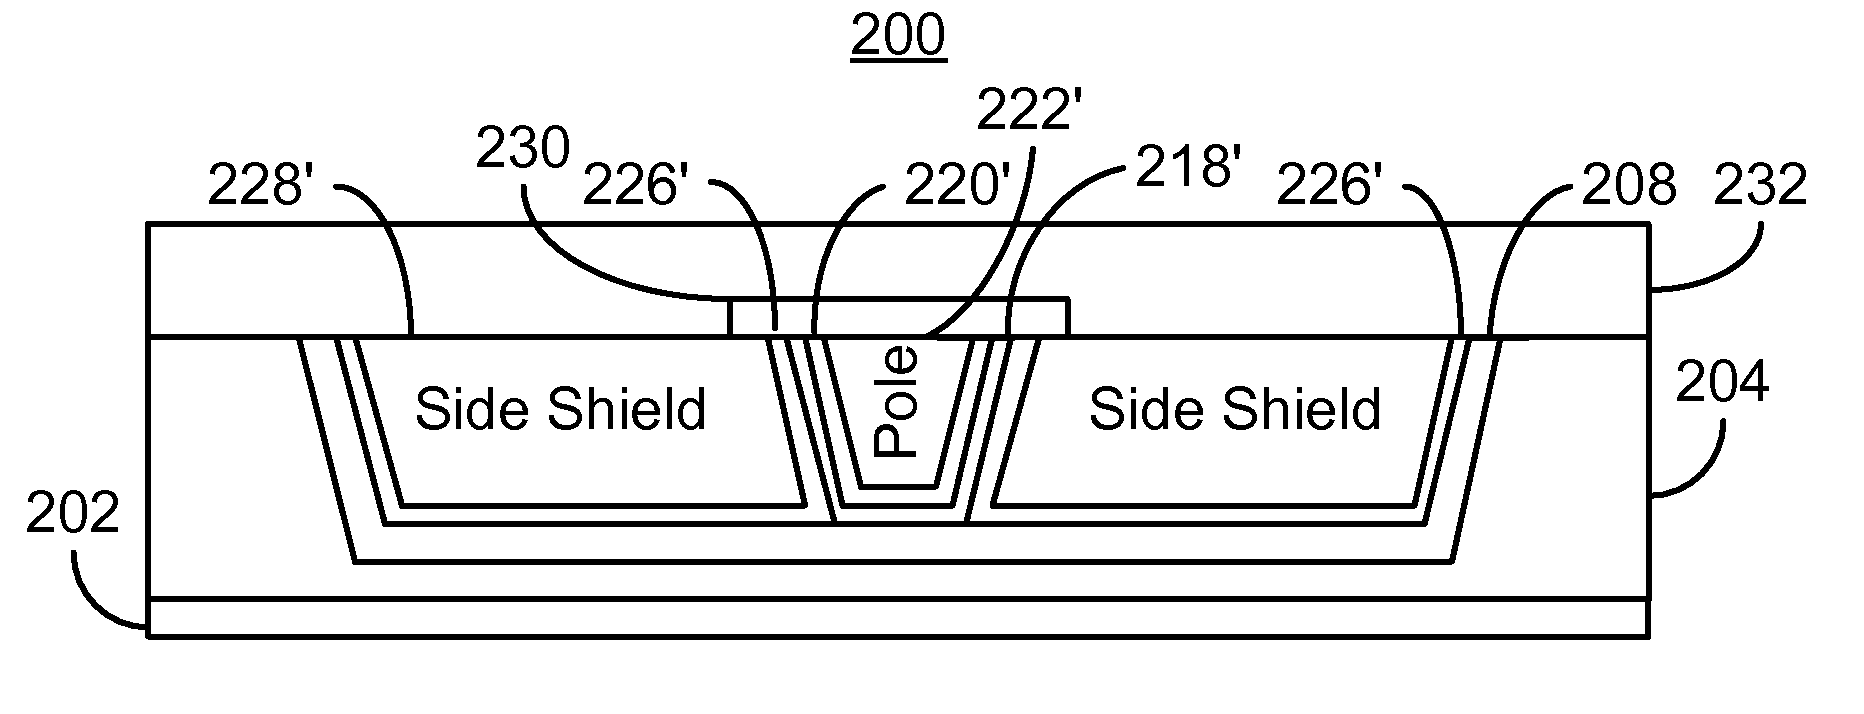 Method for fabricating a magnetic recording transducer